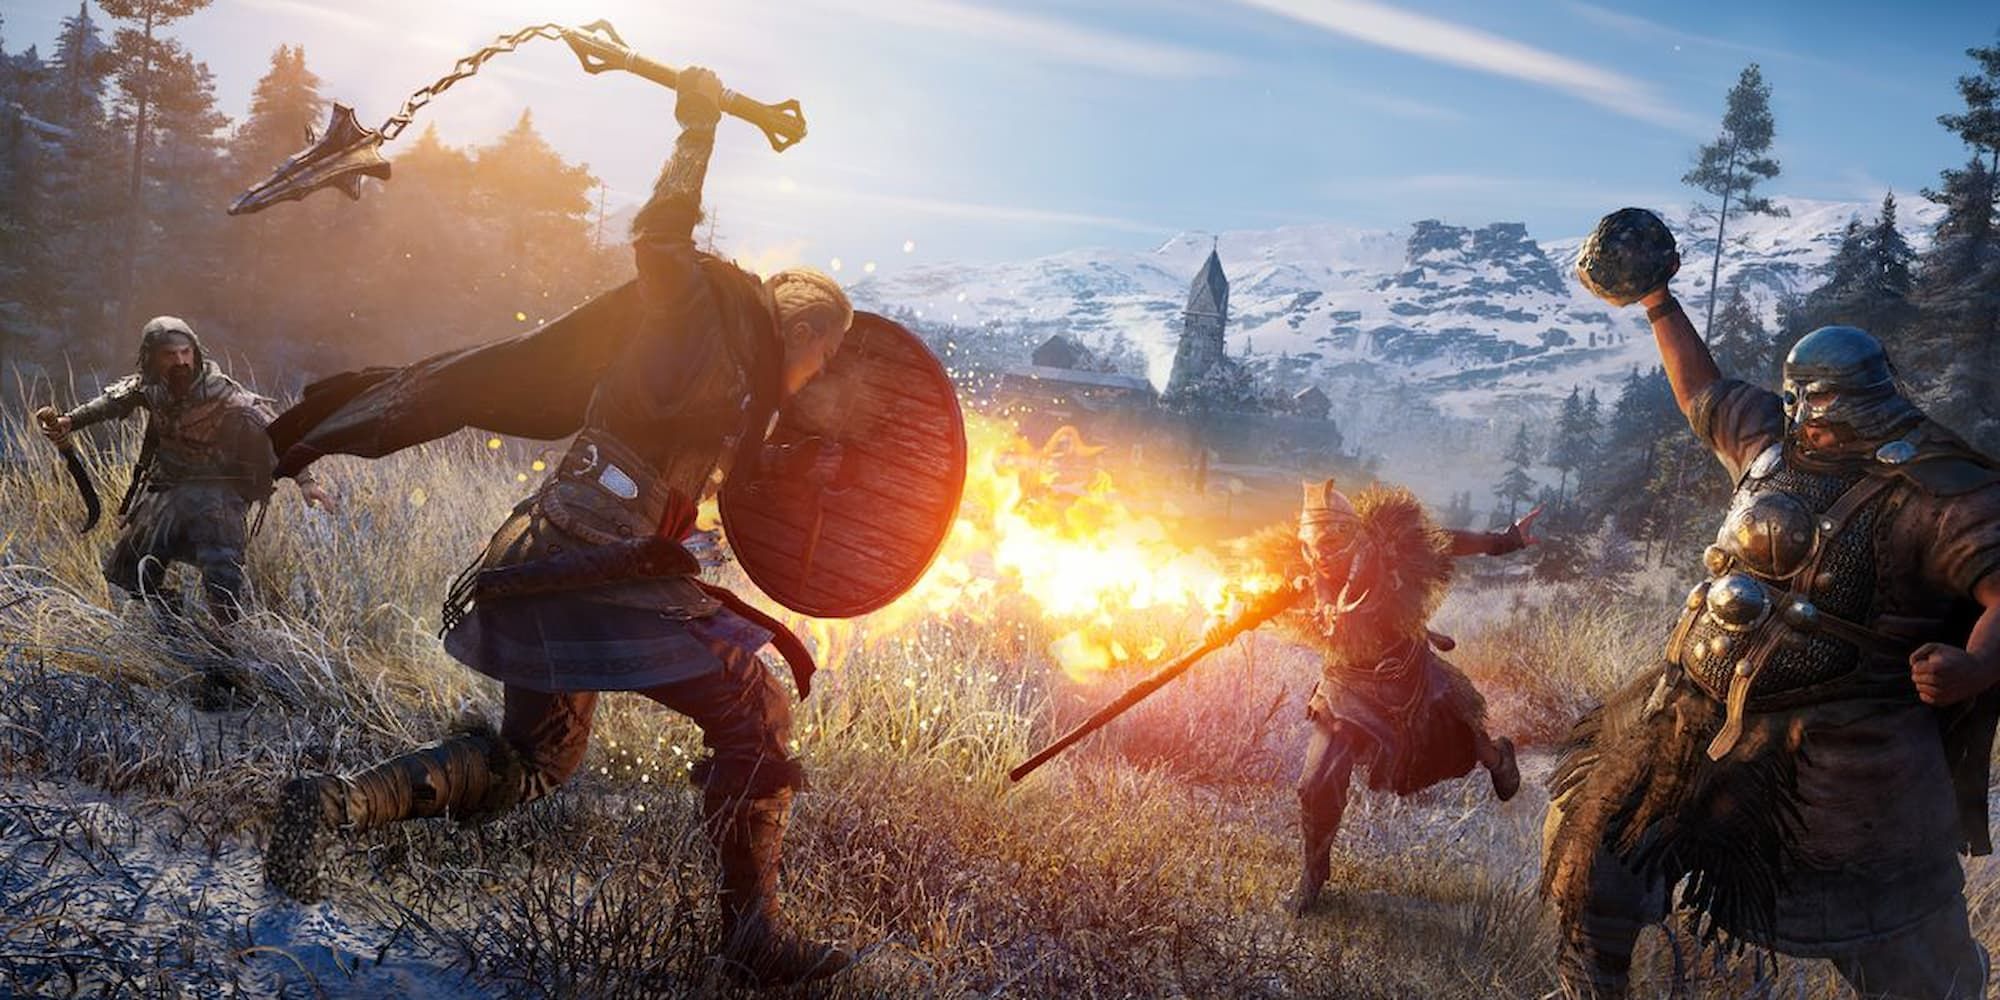 The viking warrior battles a group of raiders with a mace and shield in Assassin's Creed Valhalla.